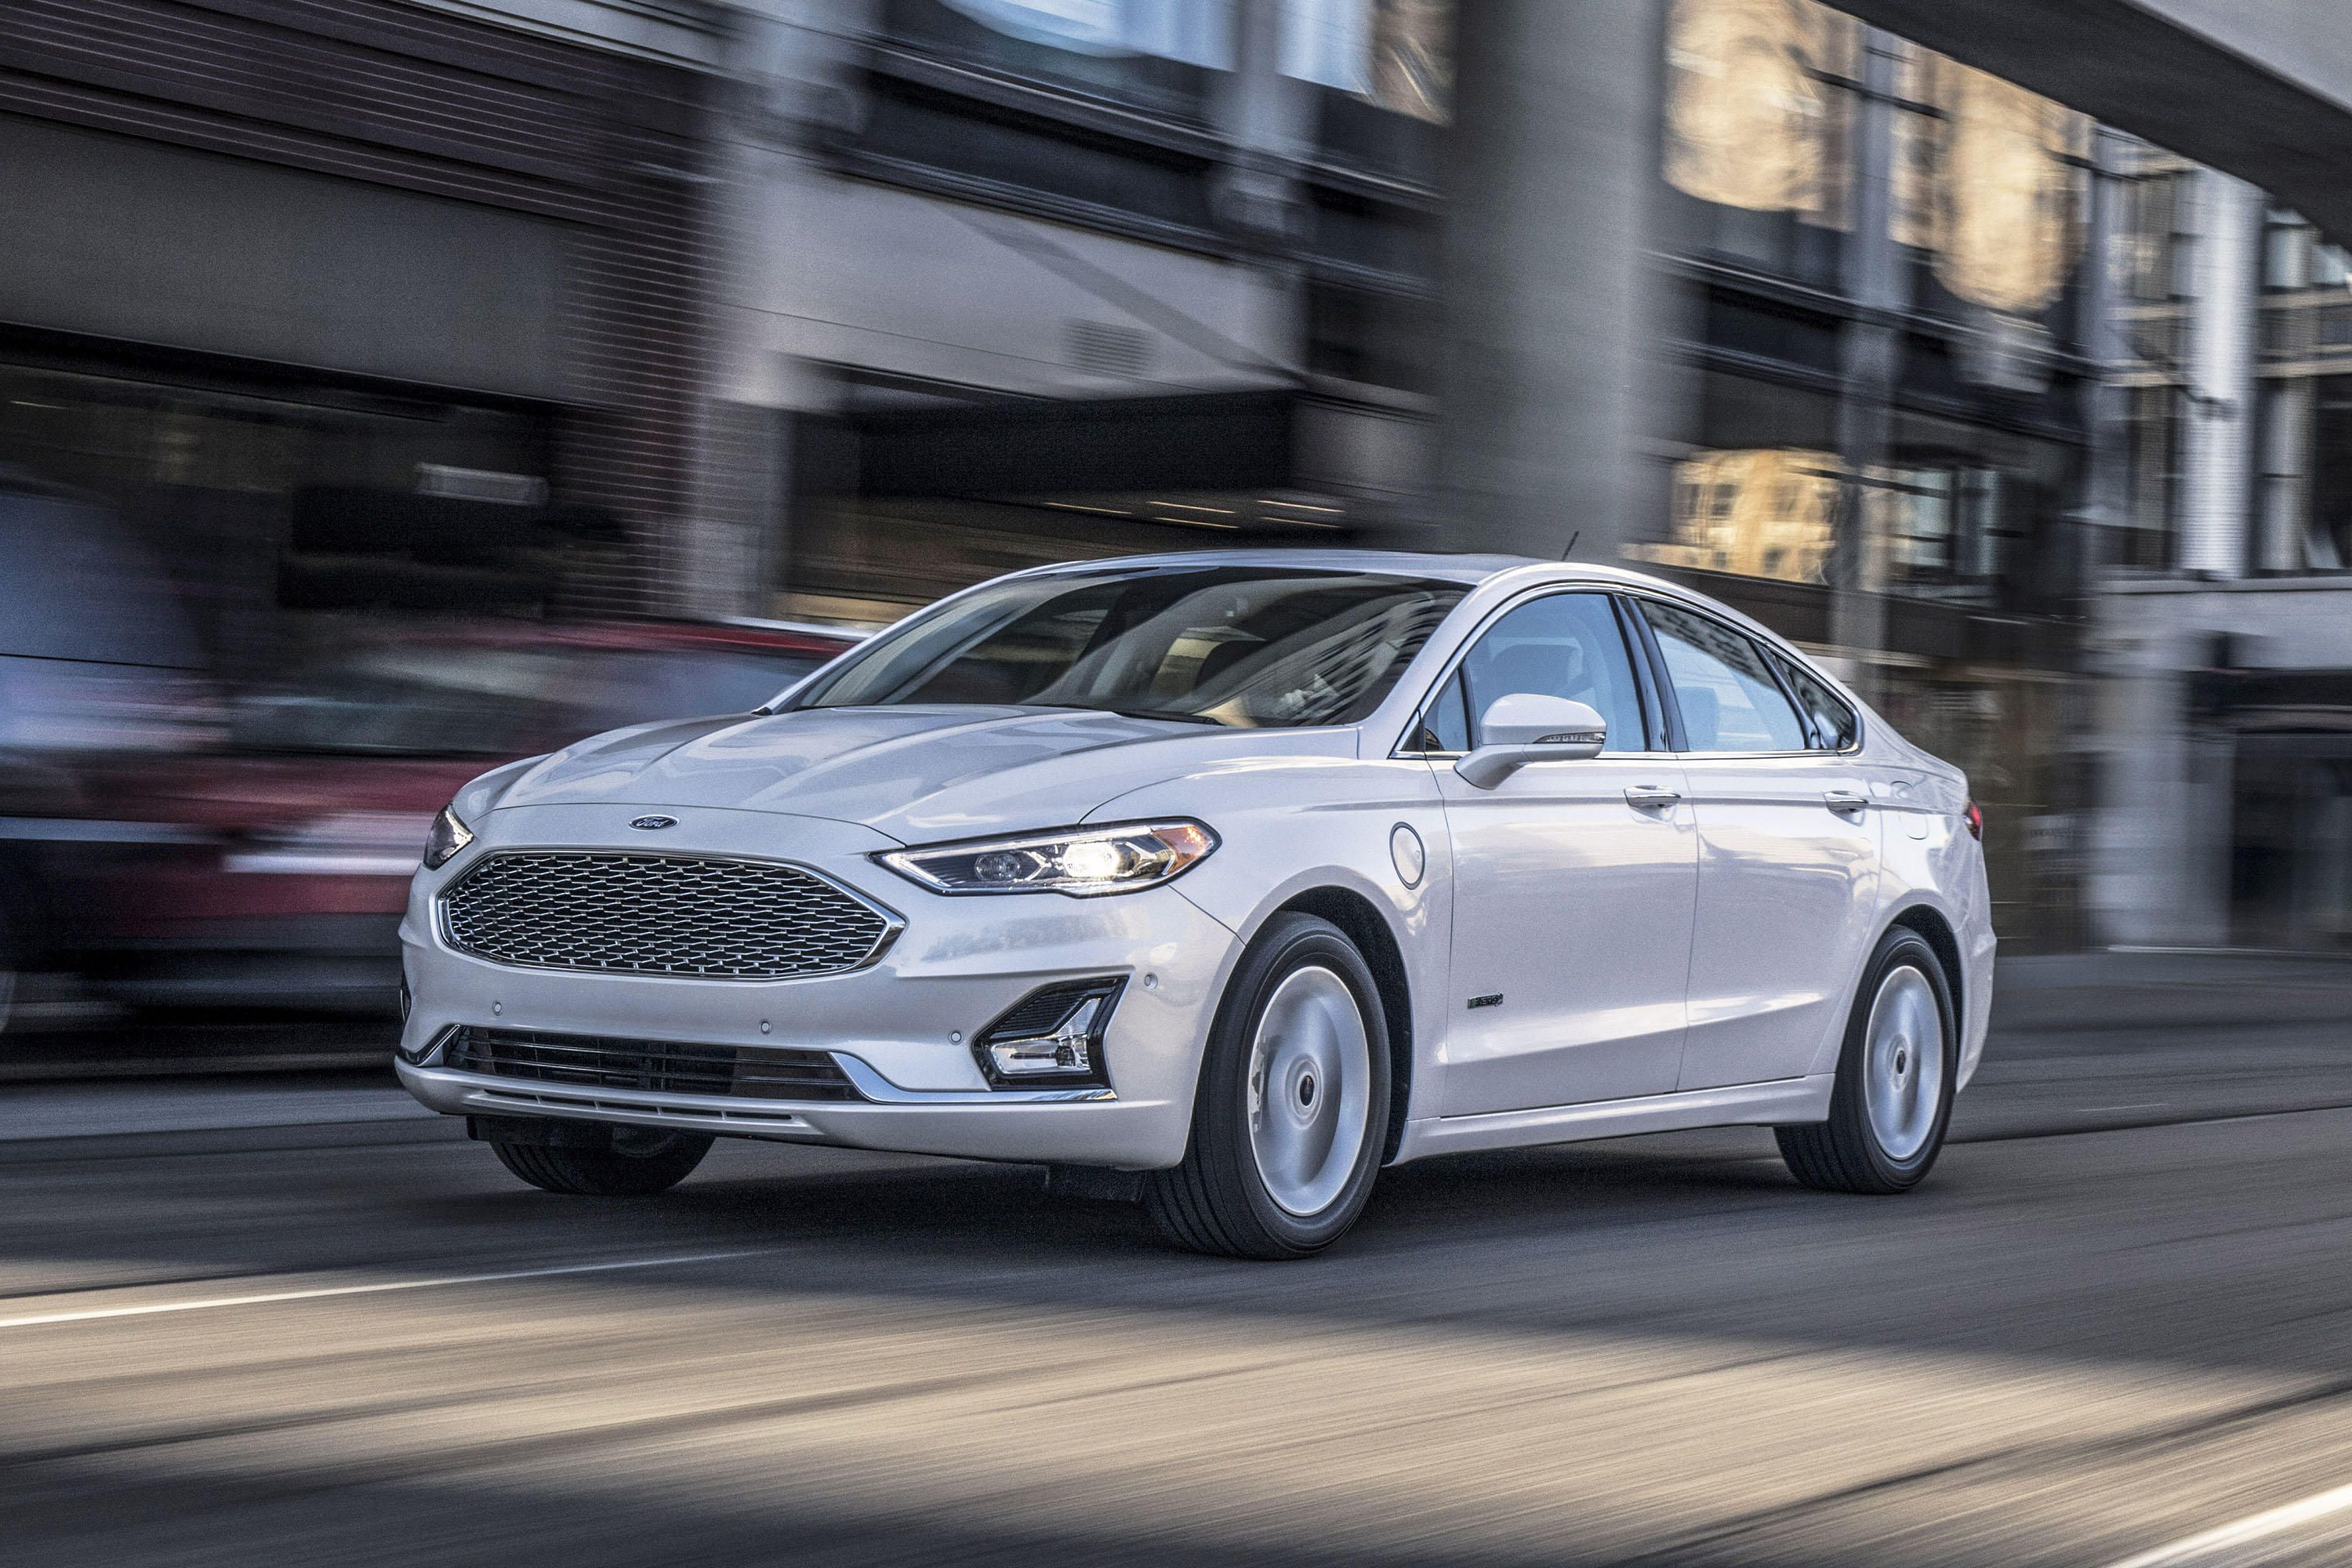 Ford Fusion exterior model